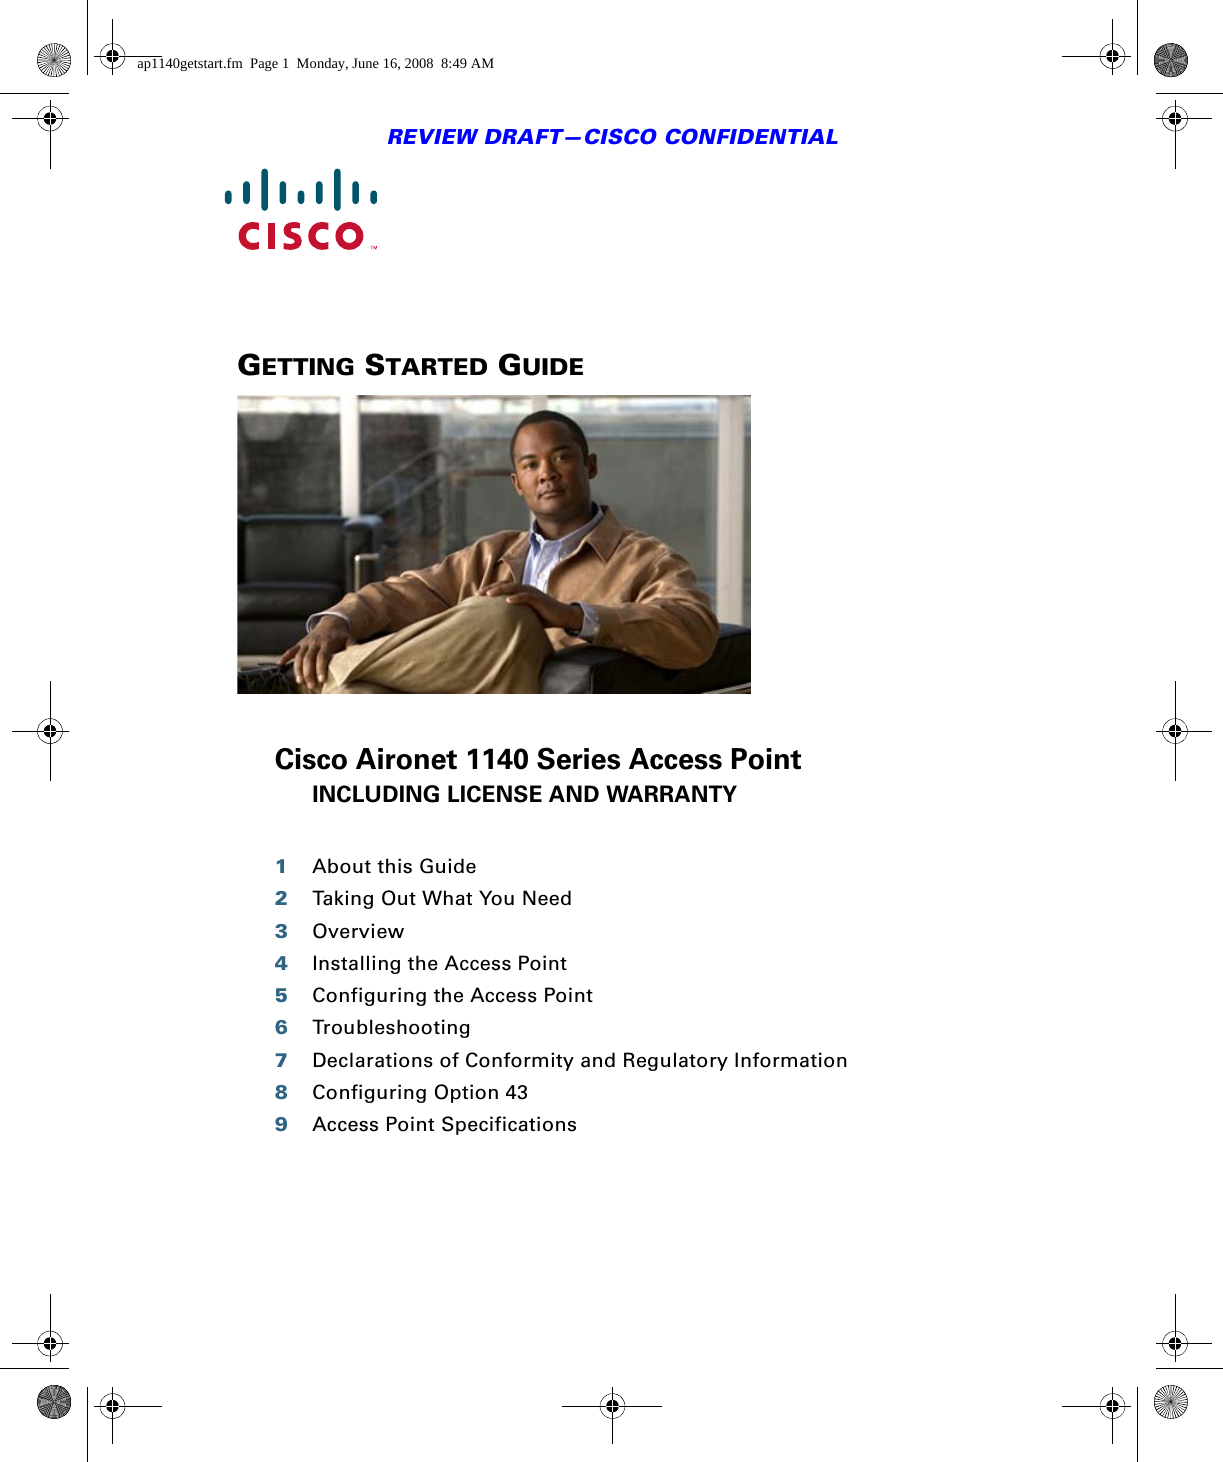 REVIEW DRAFT—CISCO CONFIDENTIALGETTING STARTED GUIDE Cisco Aironet 1140 Series Access PointINCLUDING LICENSE AND WARRANTY1About this Guide2Taking Out What You Need3Overview4Installing the Access Point5Configuring the Access Point6Troubleshooting7Declarations of Conformity and Regulatory Information8Configuring Option 439Access Point Specificationsap1140getstart.fm  Page 1  Monday, June 16, 2008  8:49 AM